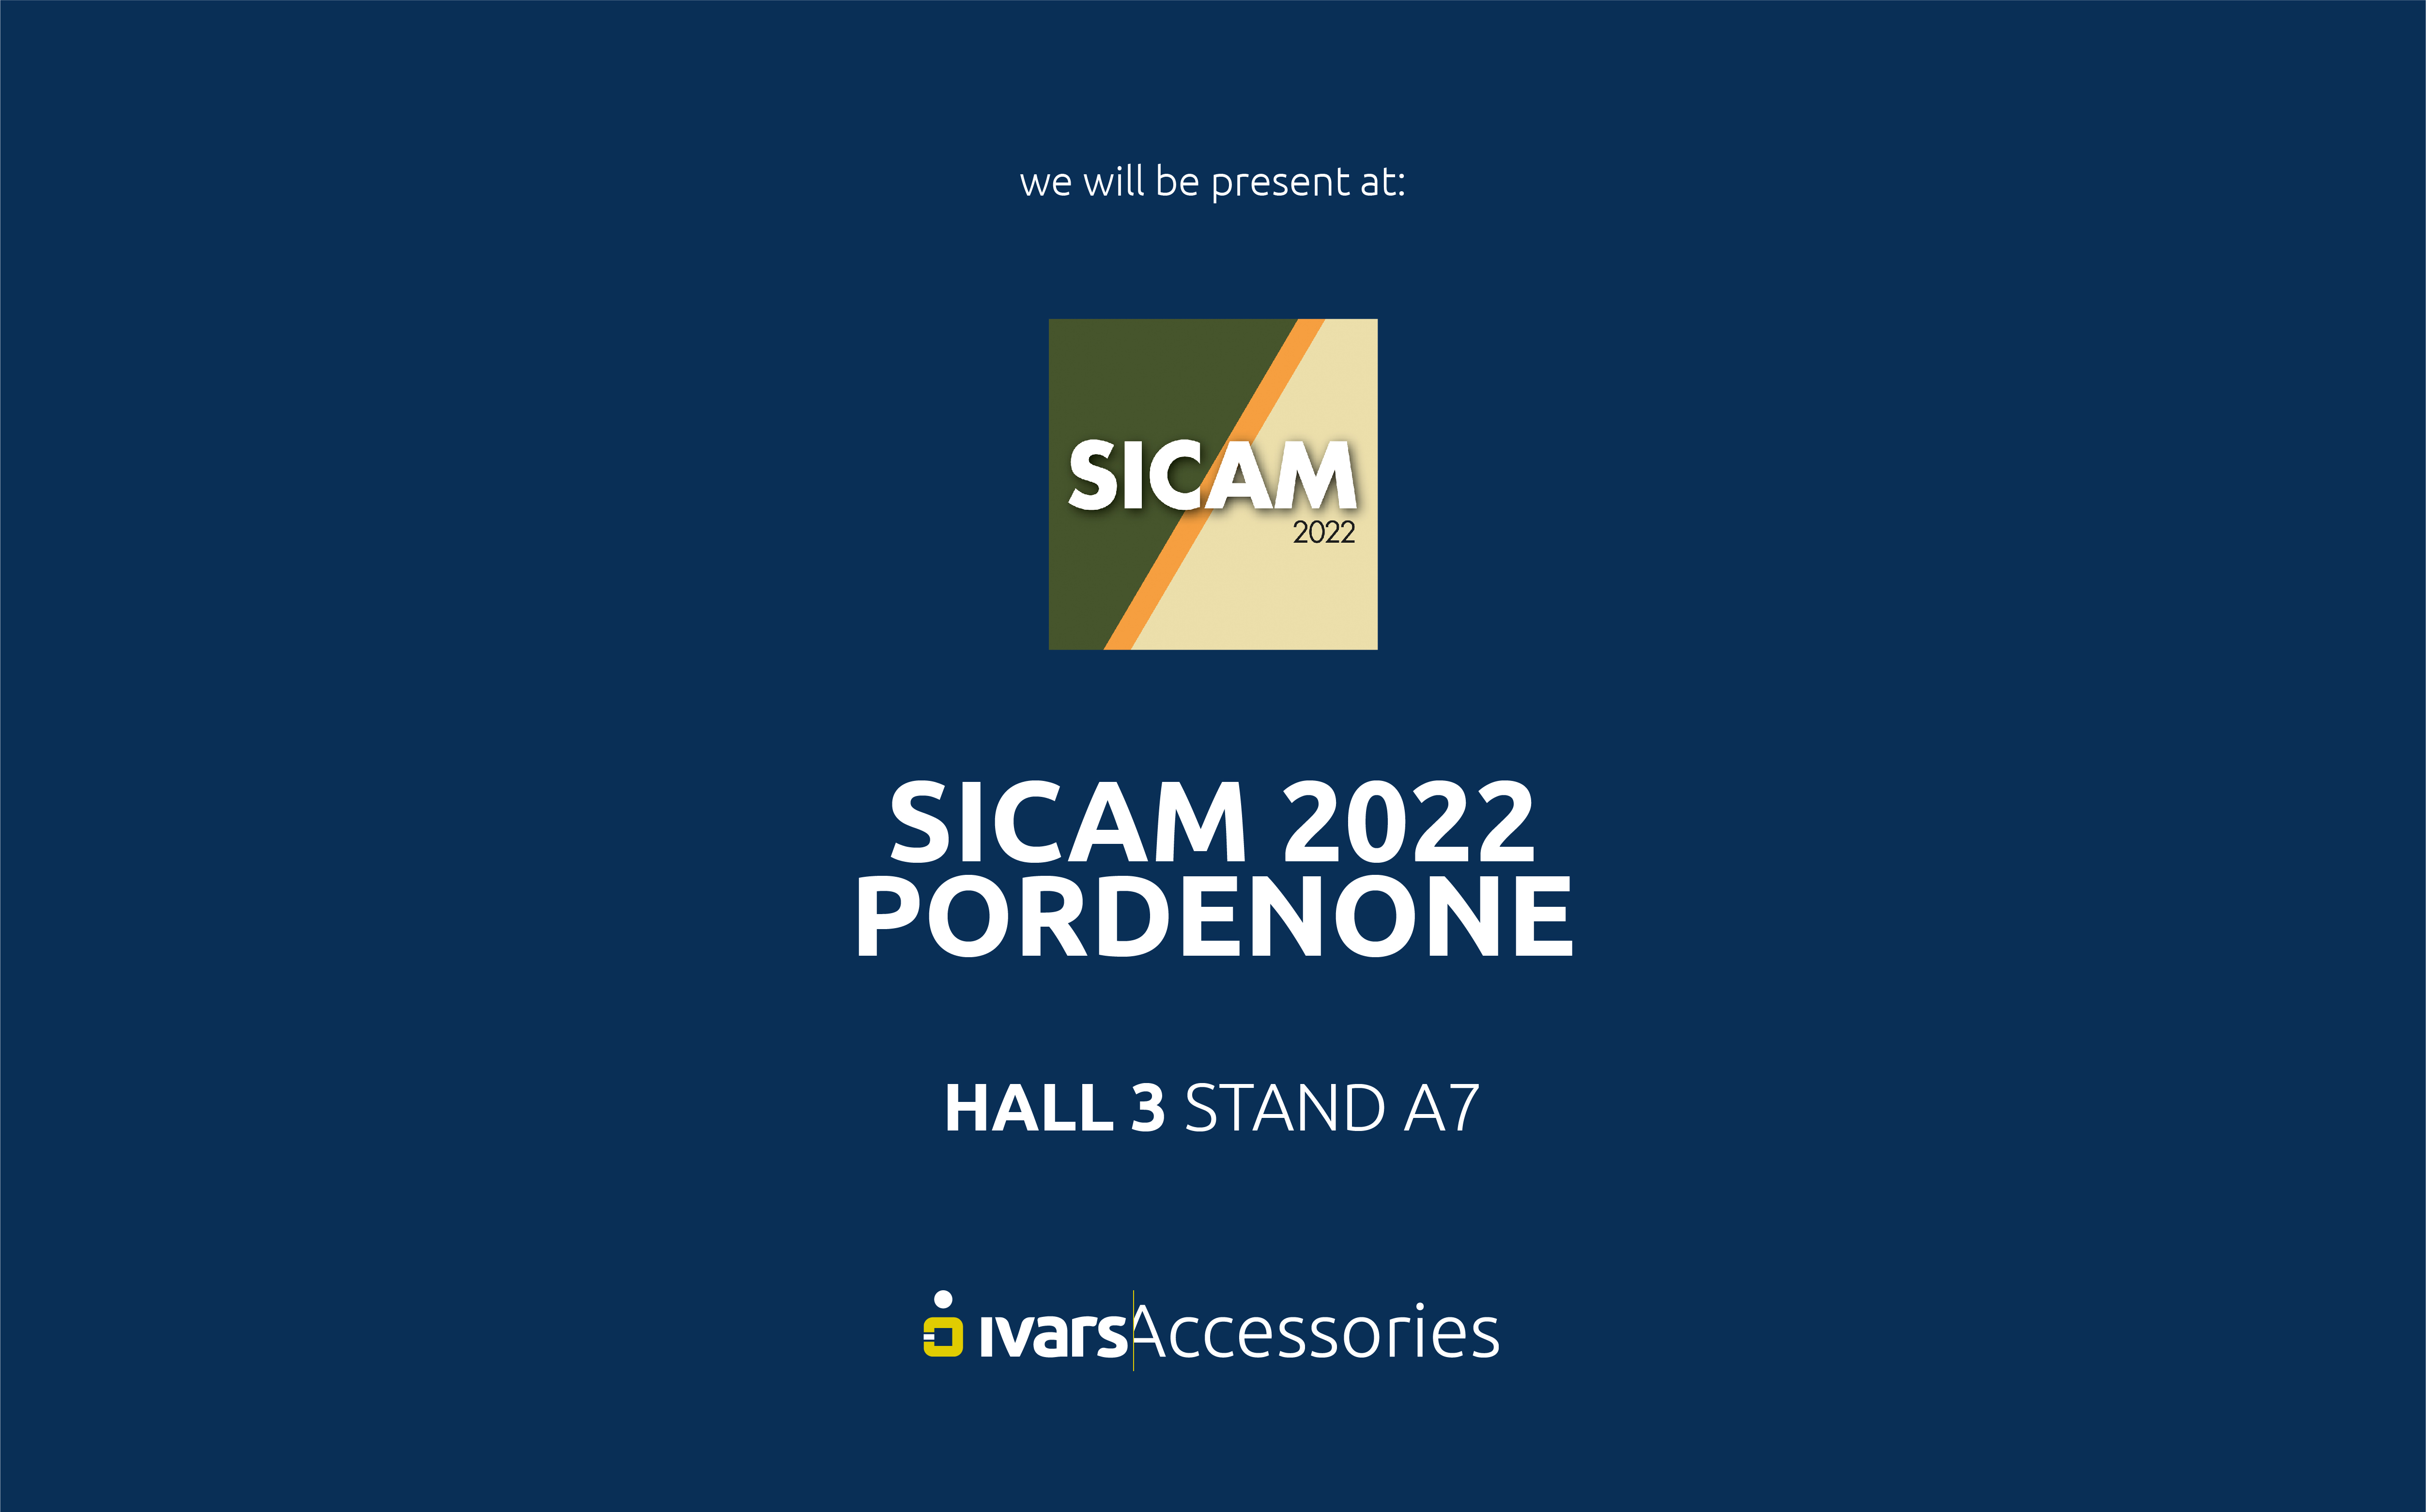 ivars-spa-accessories-division-will-be-present-at-sicam-2022